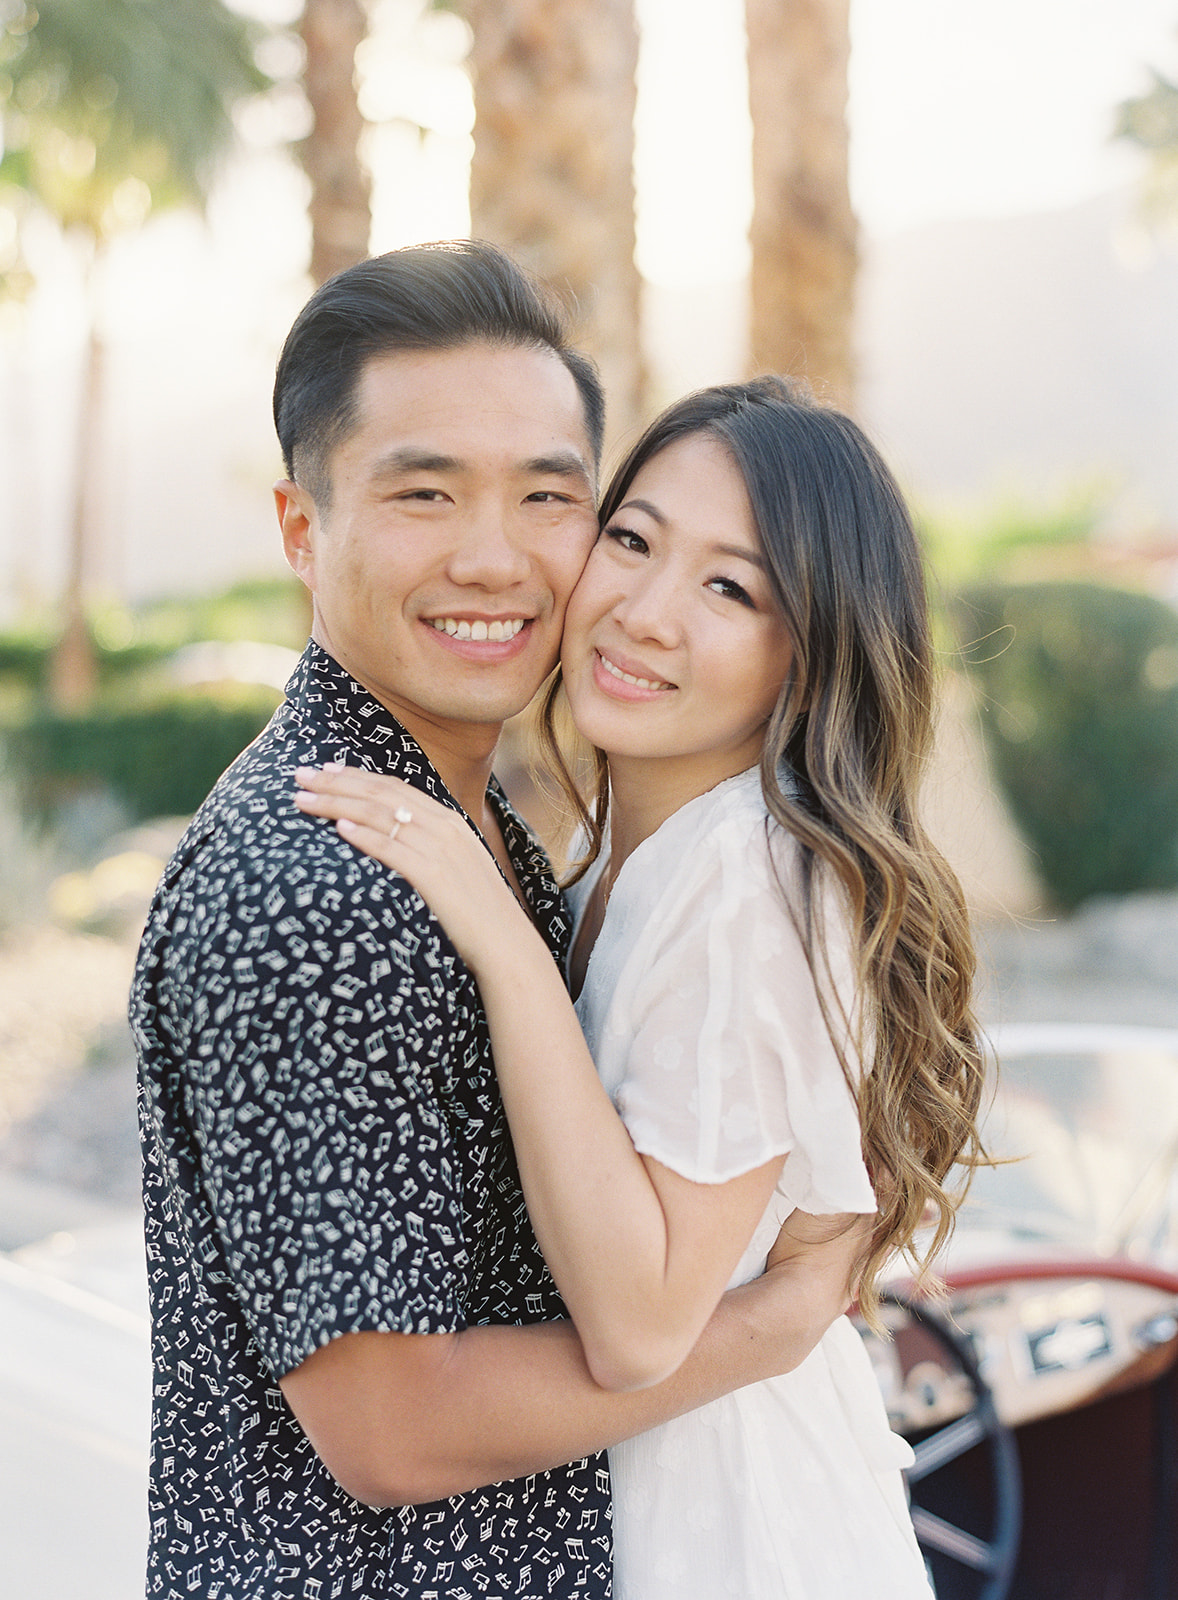 Why Have an Engagement Shoot